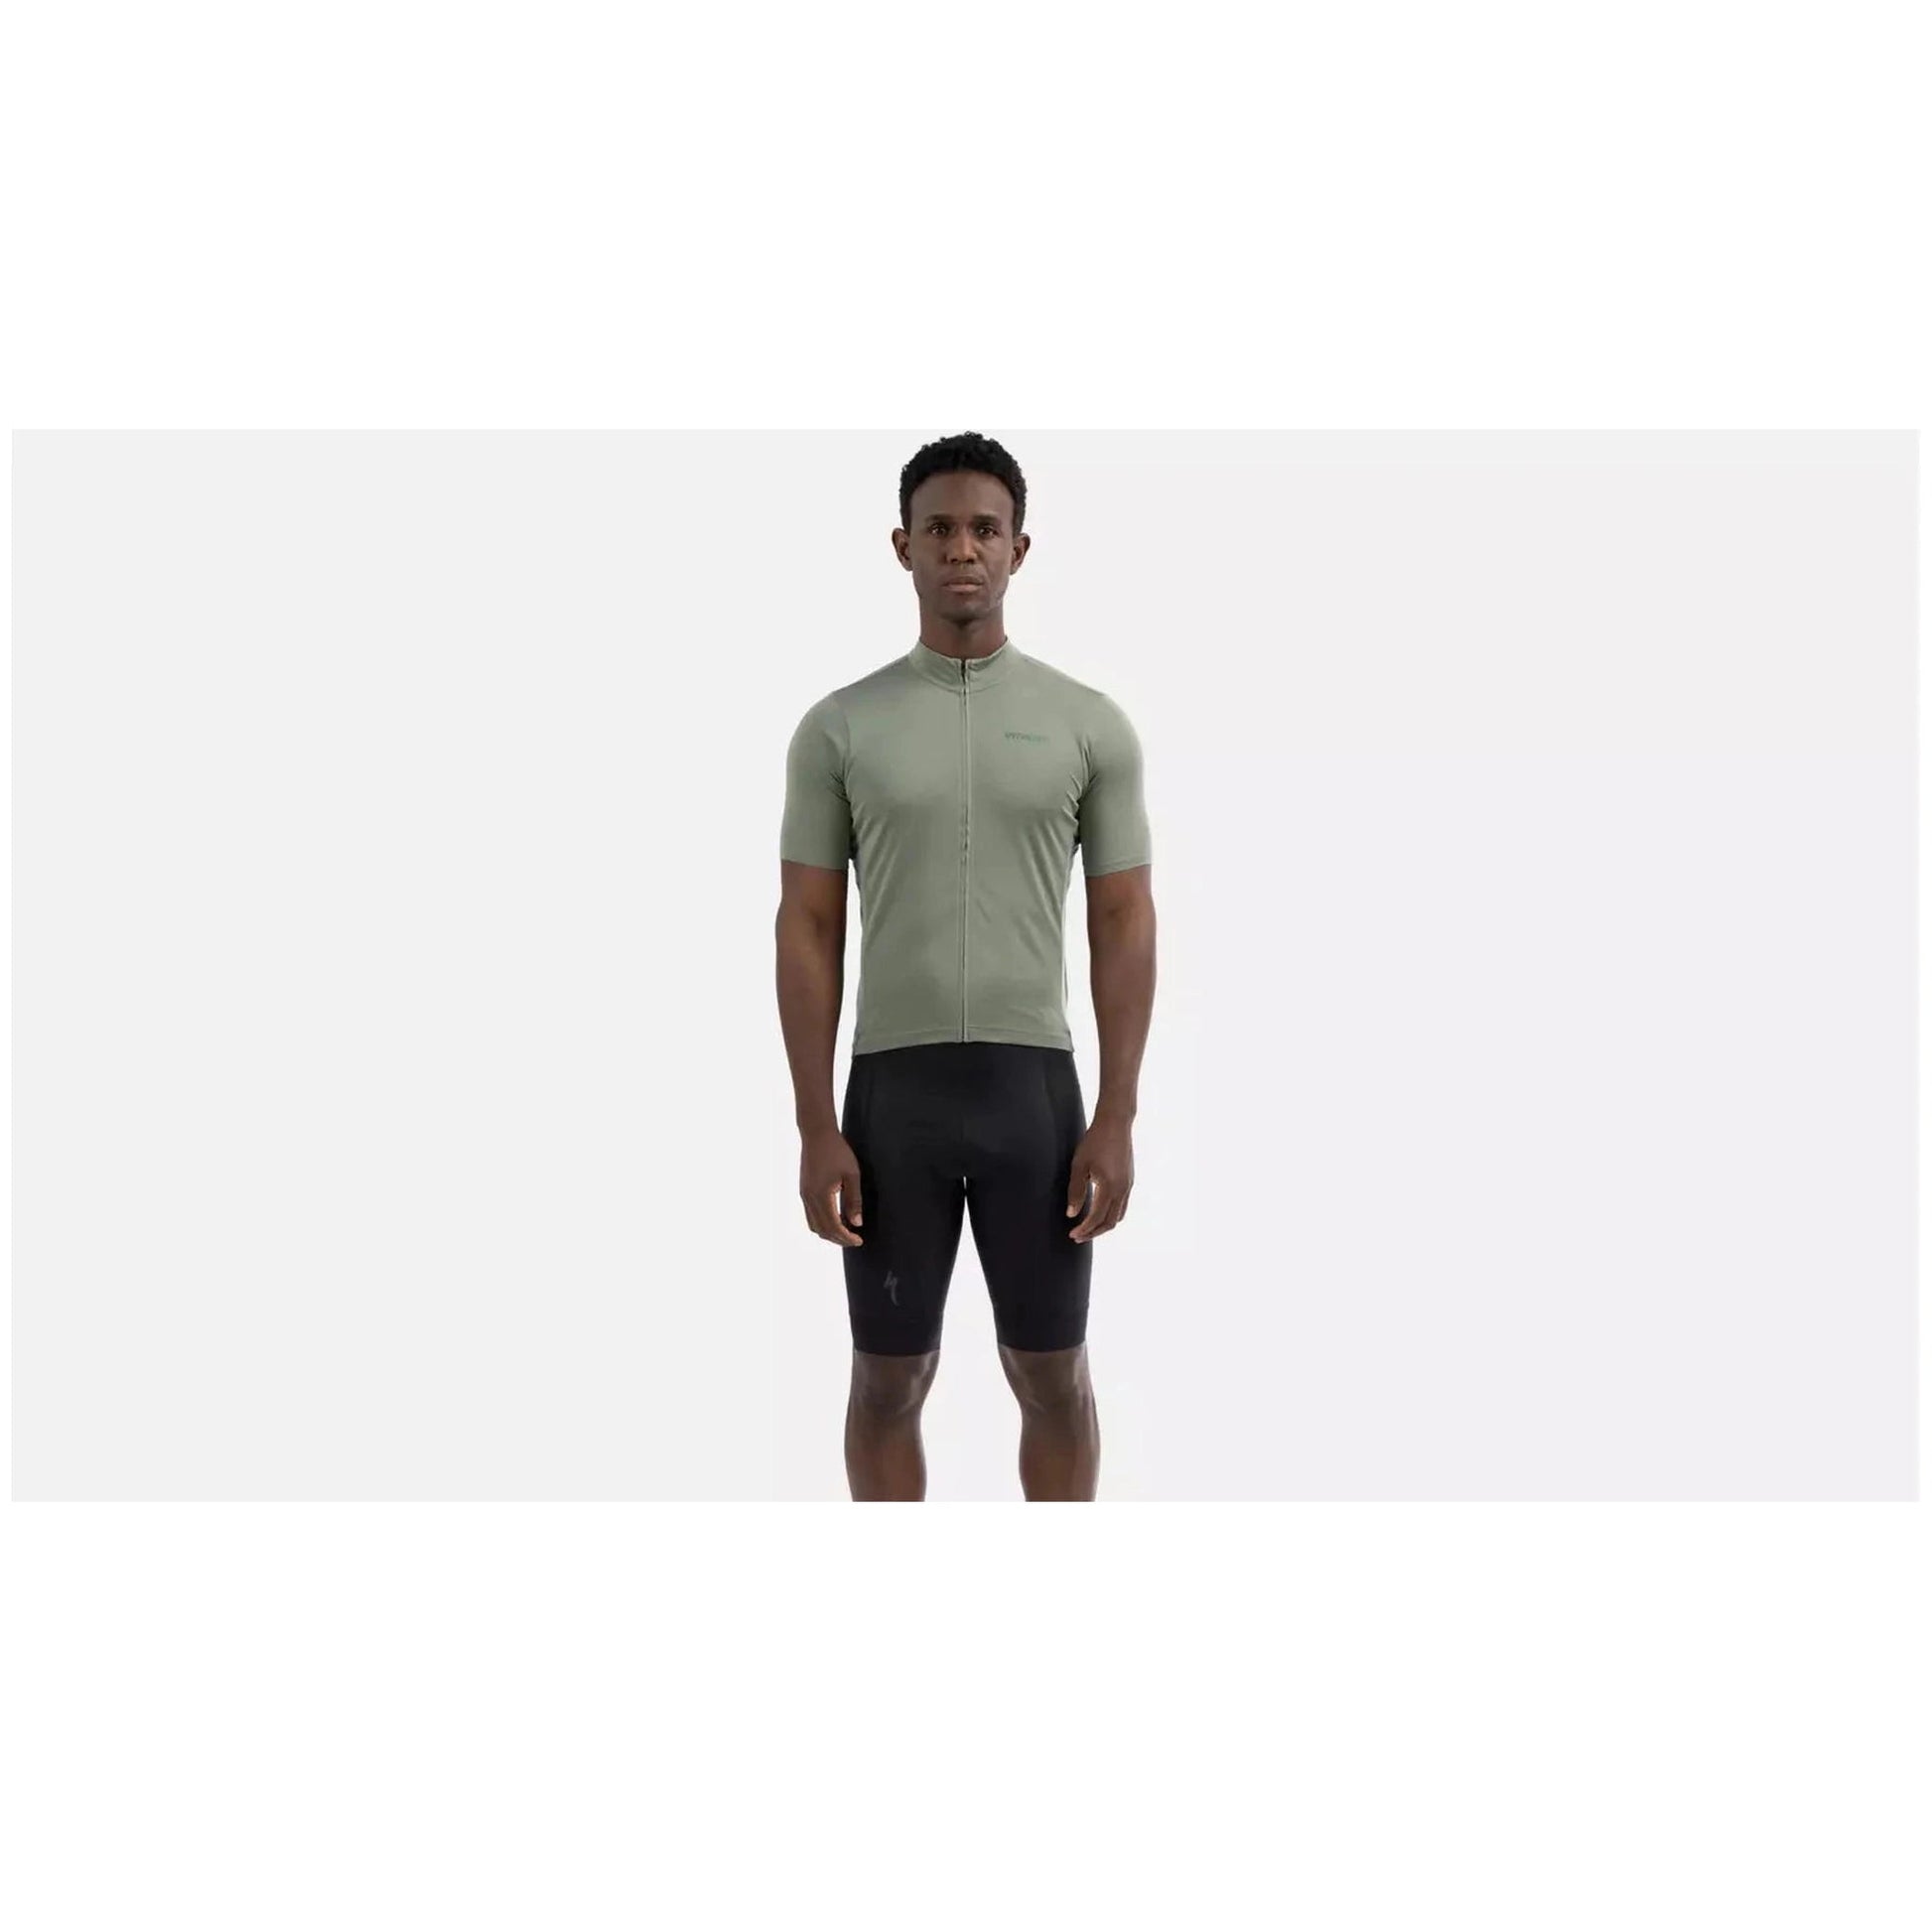 Men's RBX Classic Short Sleeve Jersey-Cycles Direct Specialized